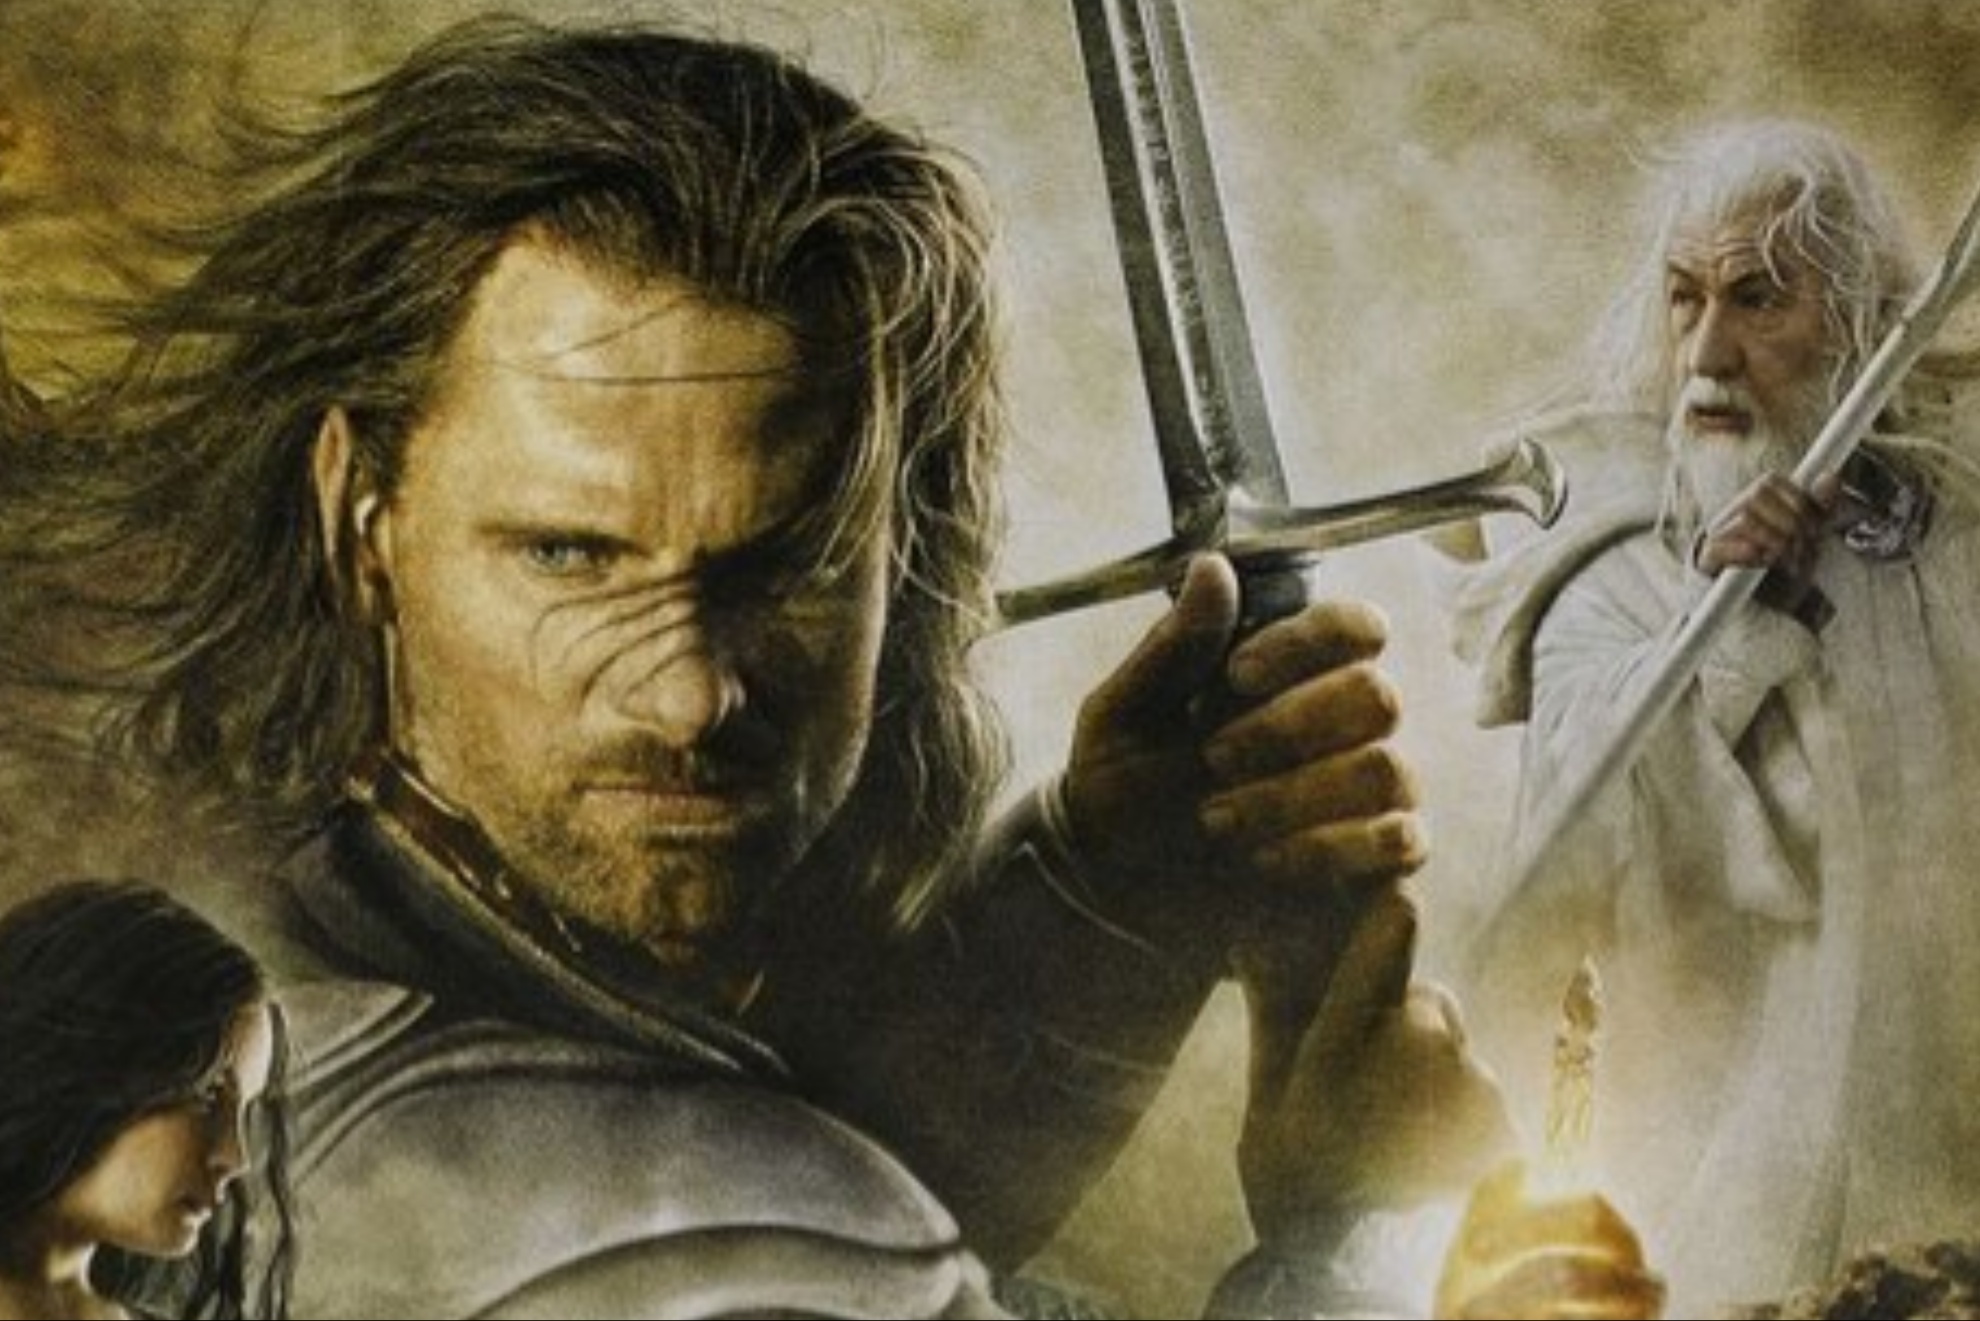 The Lord of the Rings: Return of the King won 11 Oscars 20 years ago.